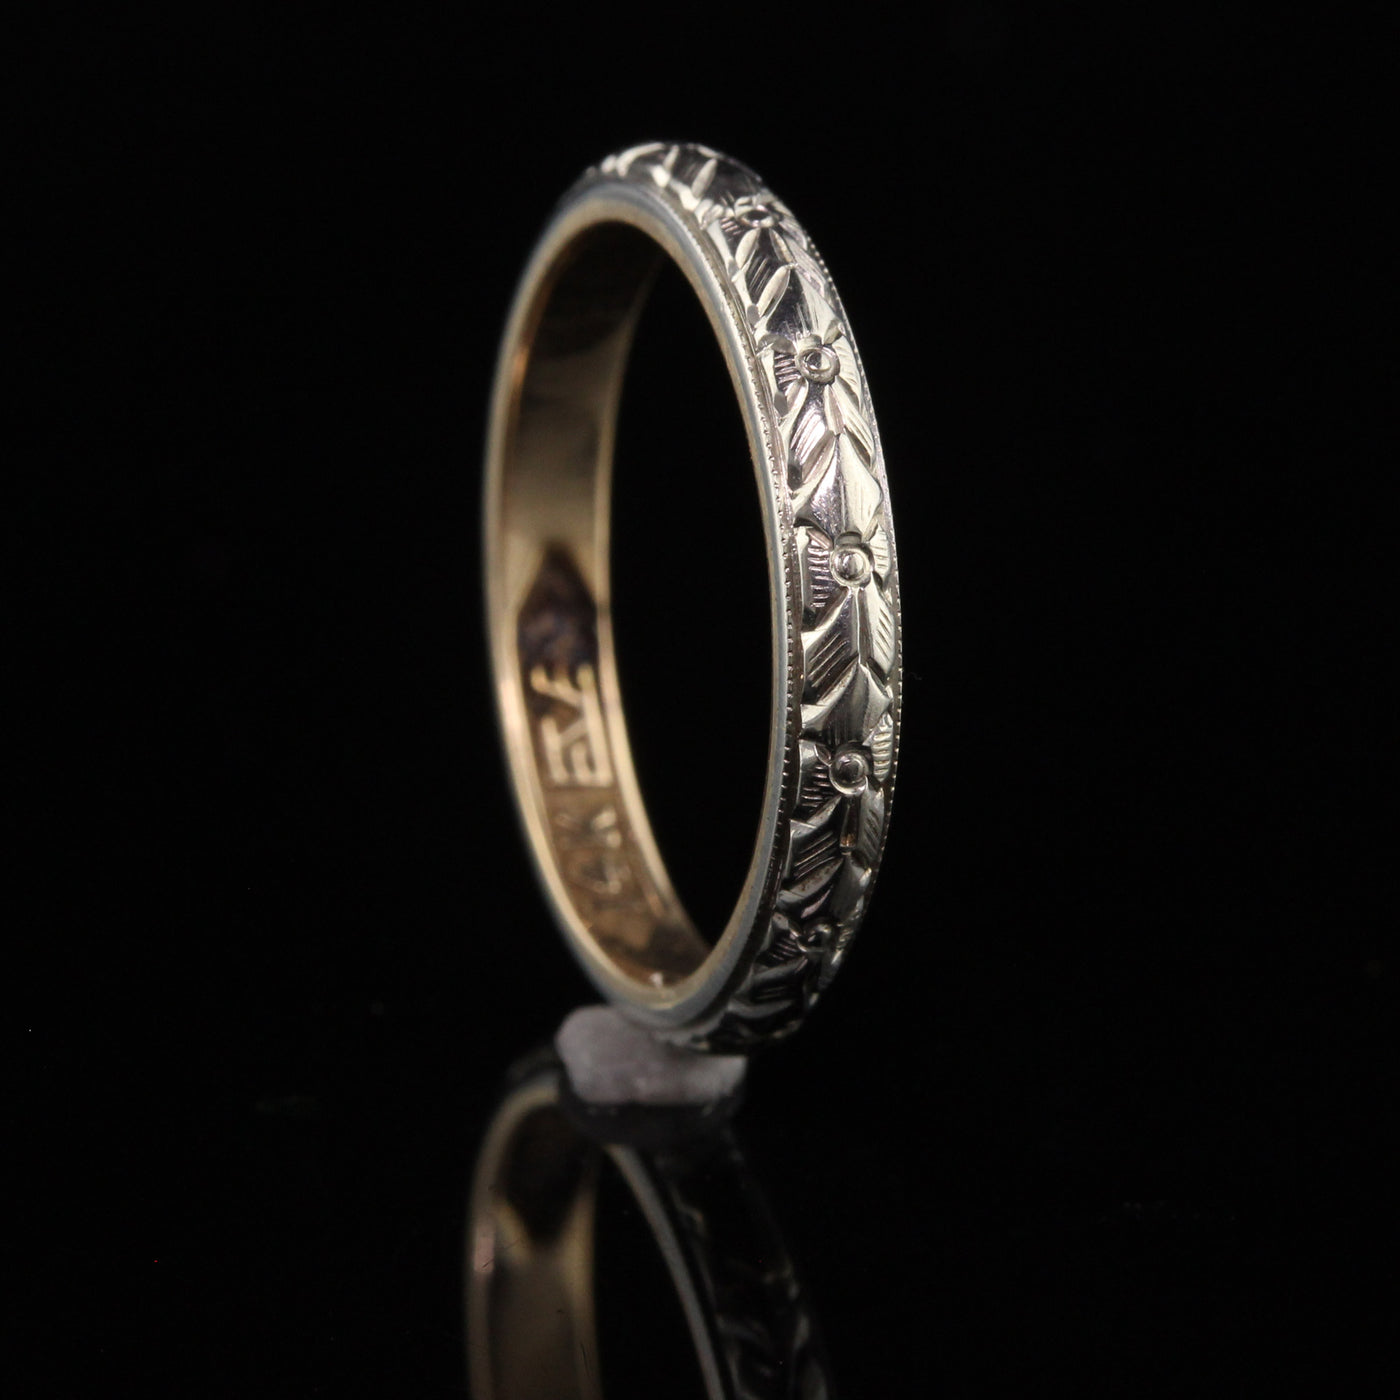 Antique Art Deco 18K White Gold and 14K Gold Classic Engraved Wedding Band